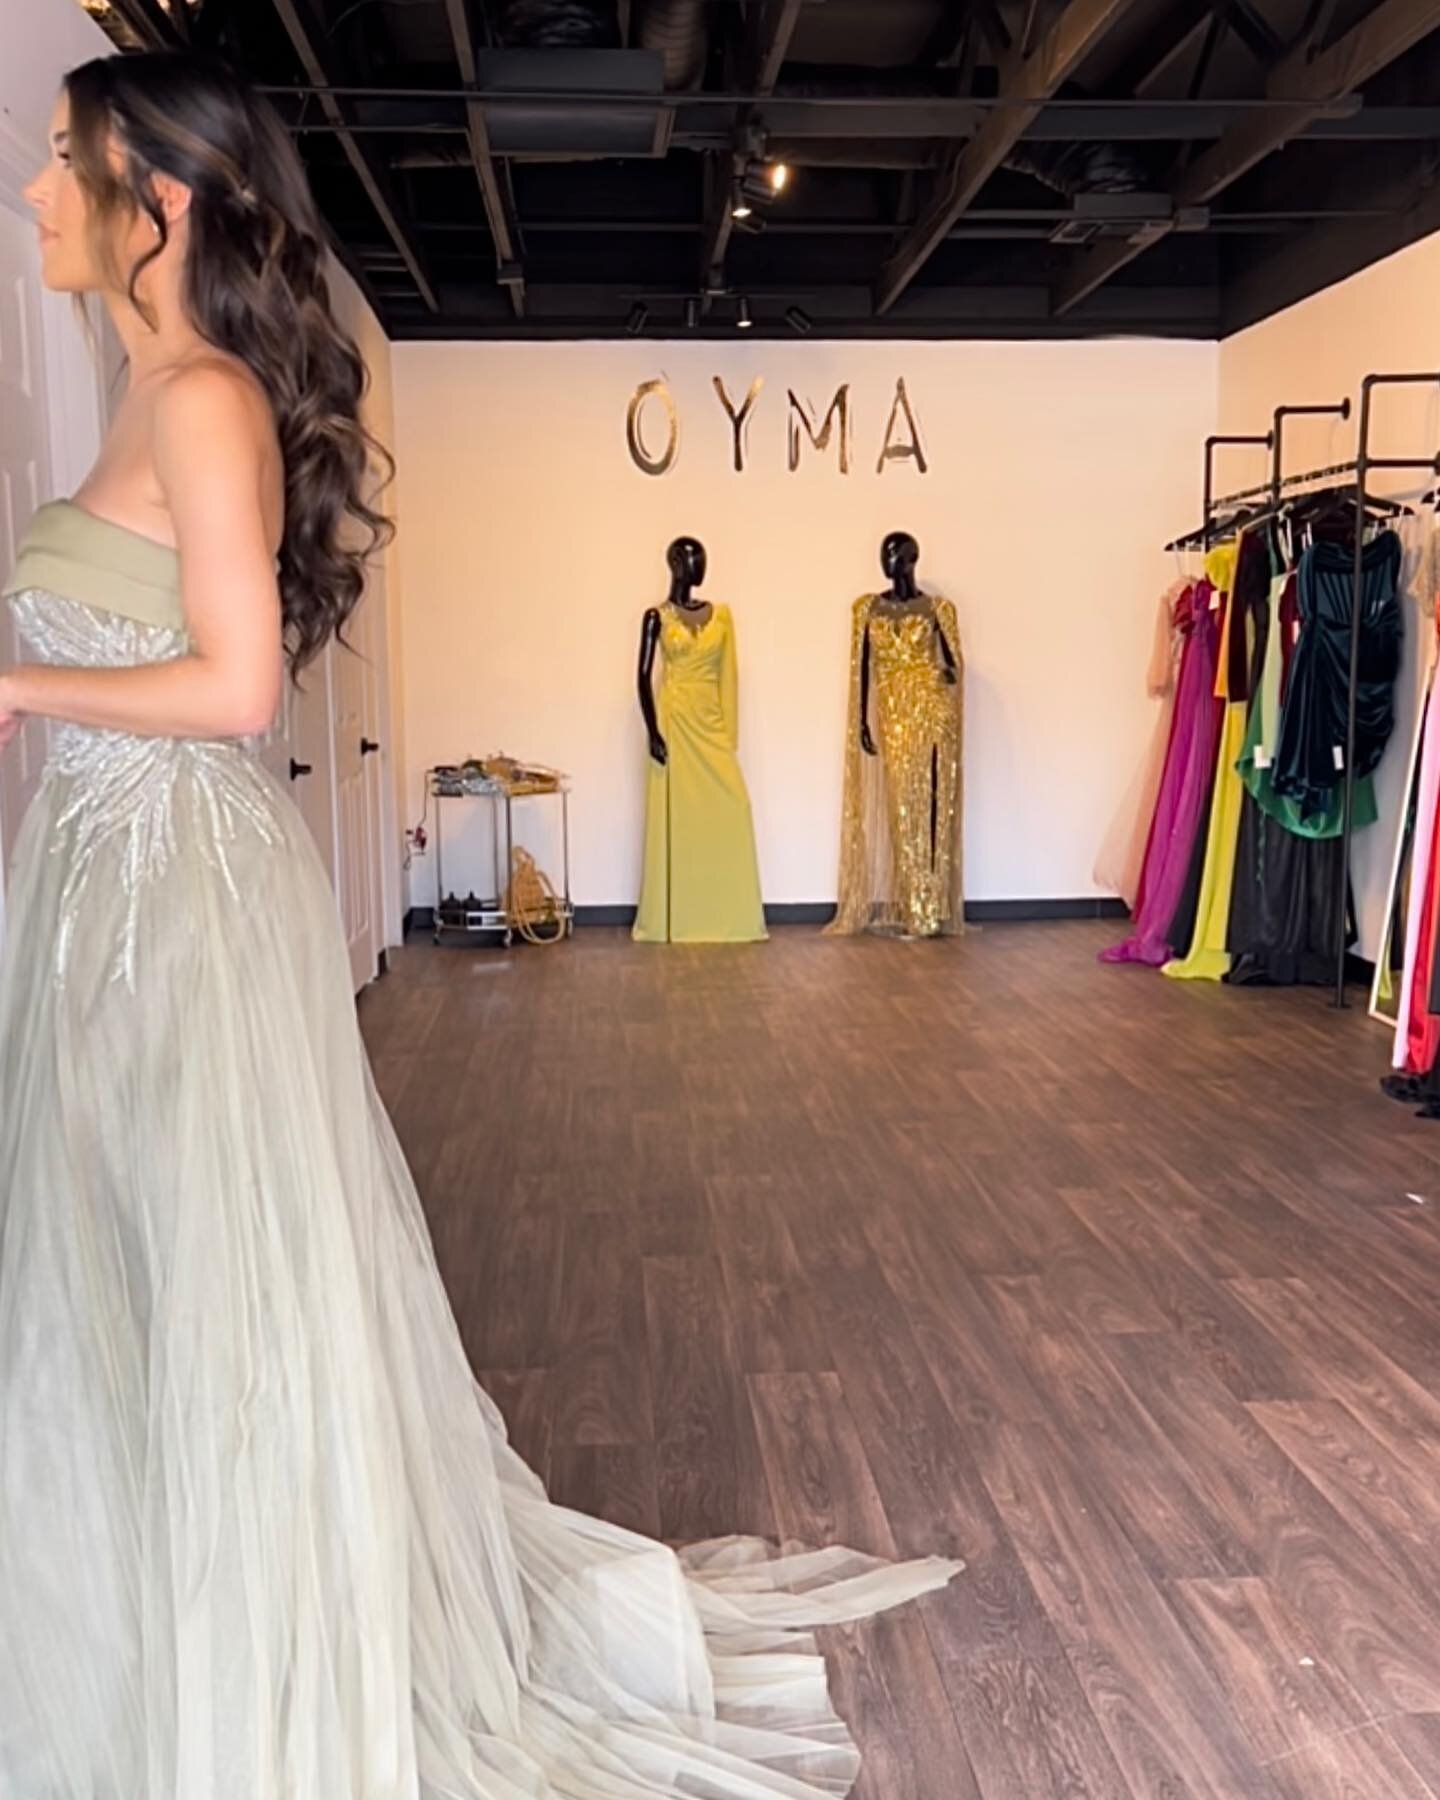 Fall is here and wedding season in Arizona has officially started 🥂 book your appointment with us (link in bio), we can&rsquo;t wait to dress you! 

&bull;&bull;&bull;

OYMA Boutique 
📍10210 N. 32nd St
Suite A2
Phoenix, AZ 85028

☎️ +1 (602) 702-85